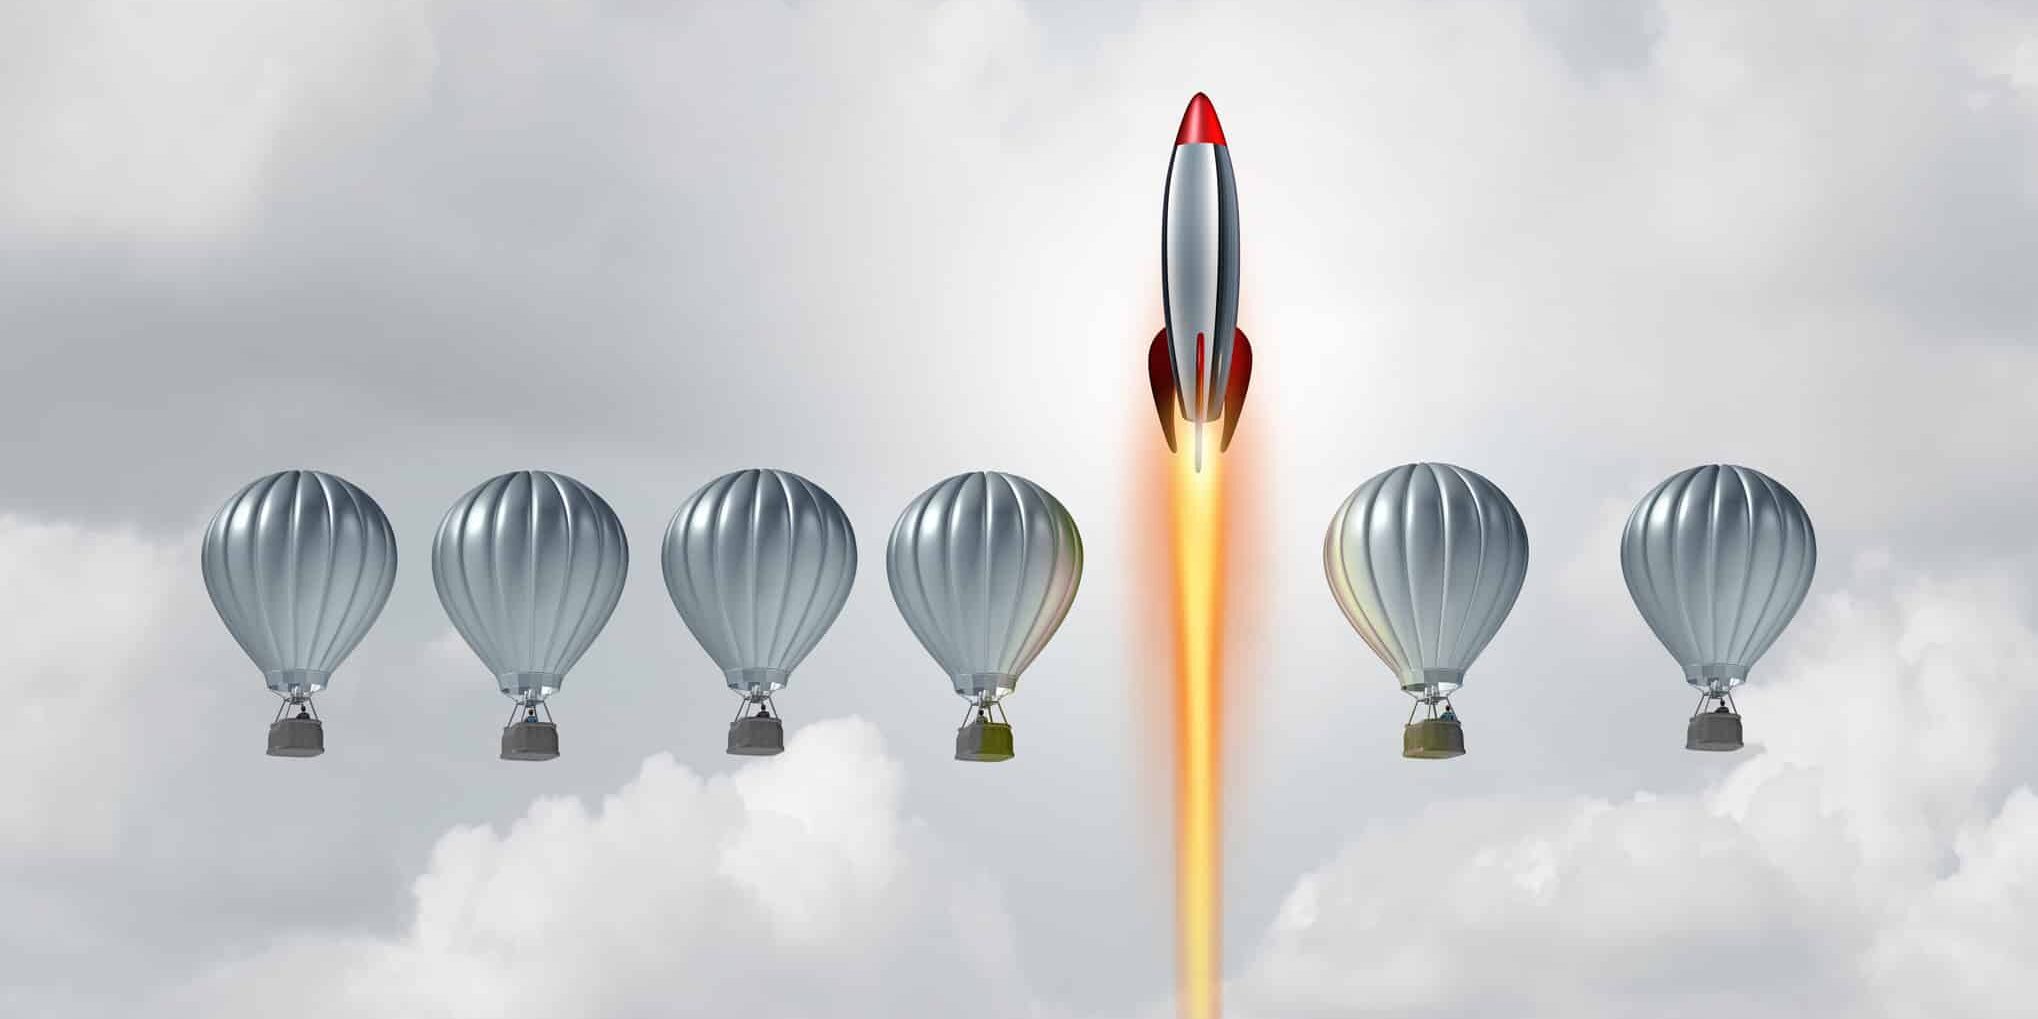 Rocket taking off next to hot air balloons representing how video transforms a business compared to others